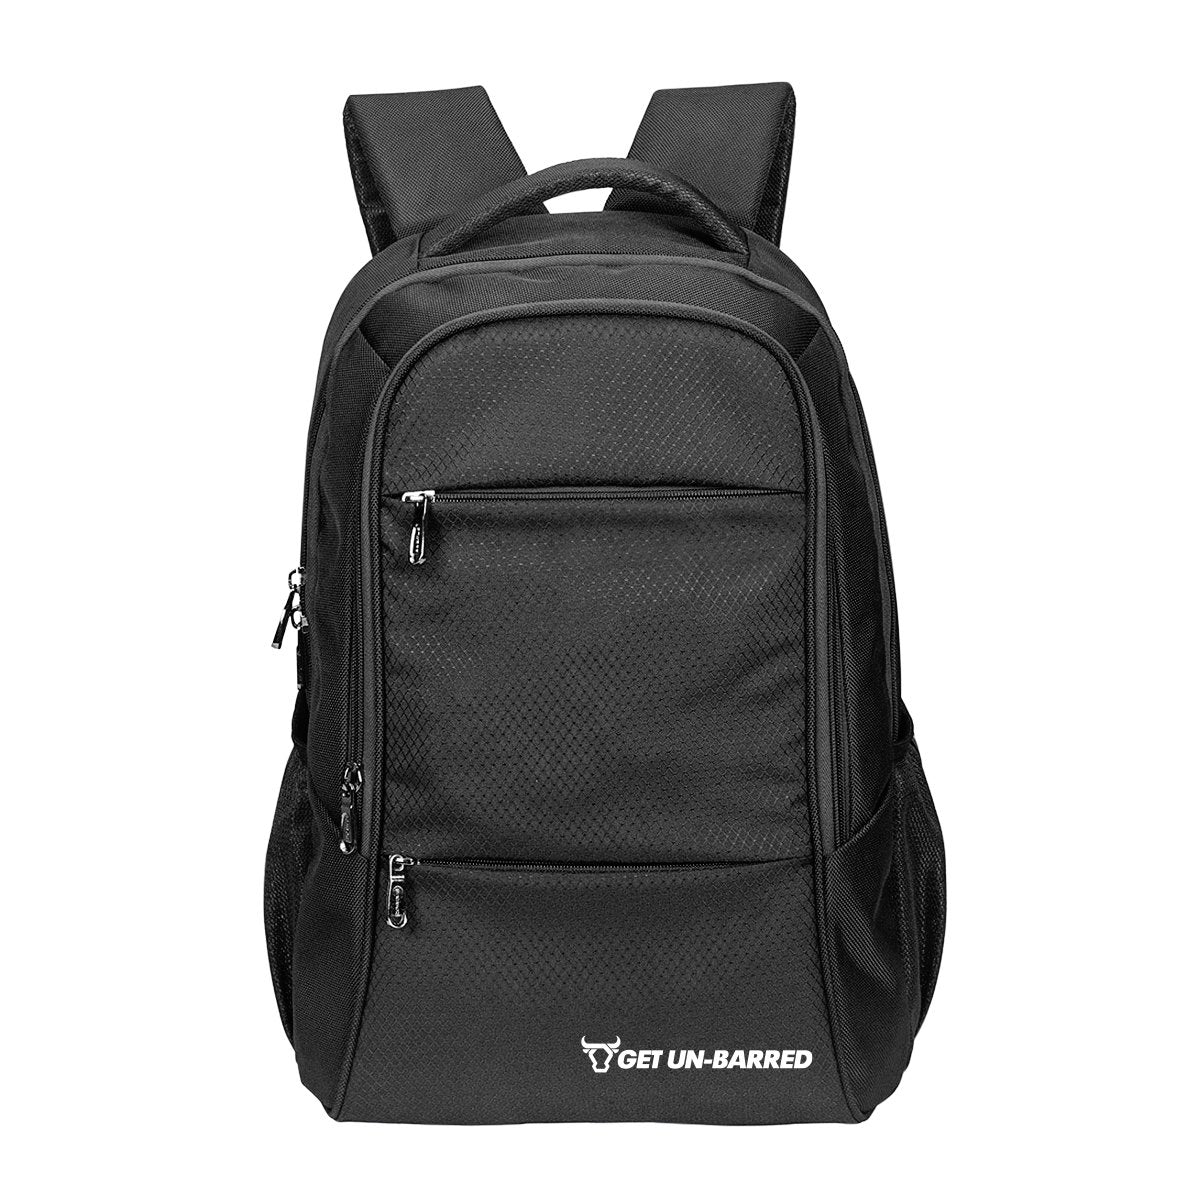 Lexus 40Ltr Laptop Backpack Upto 15.6 Inches - Black